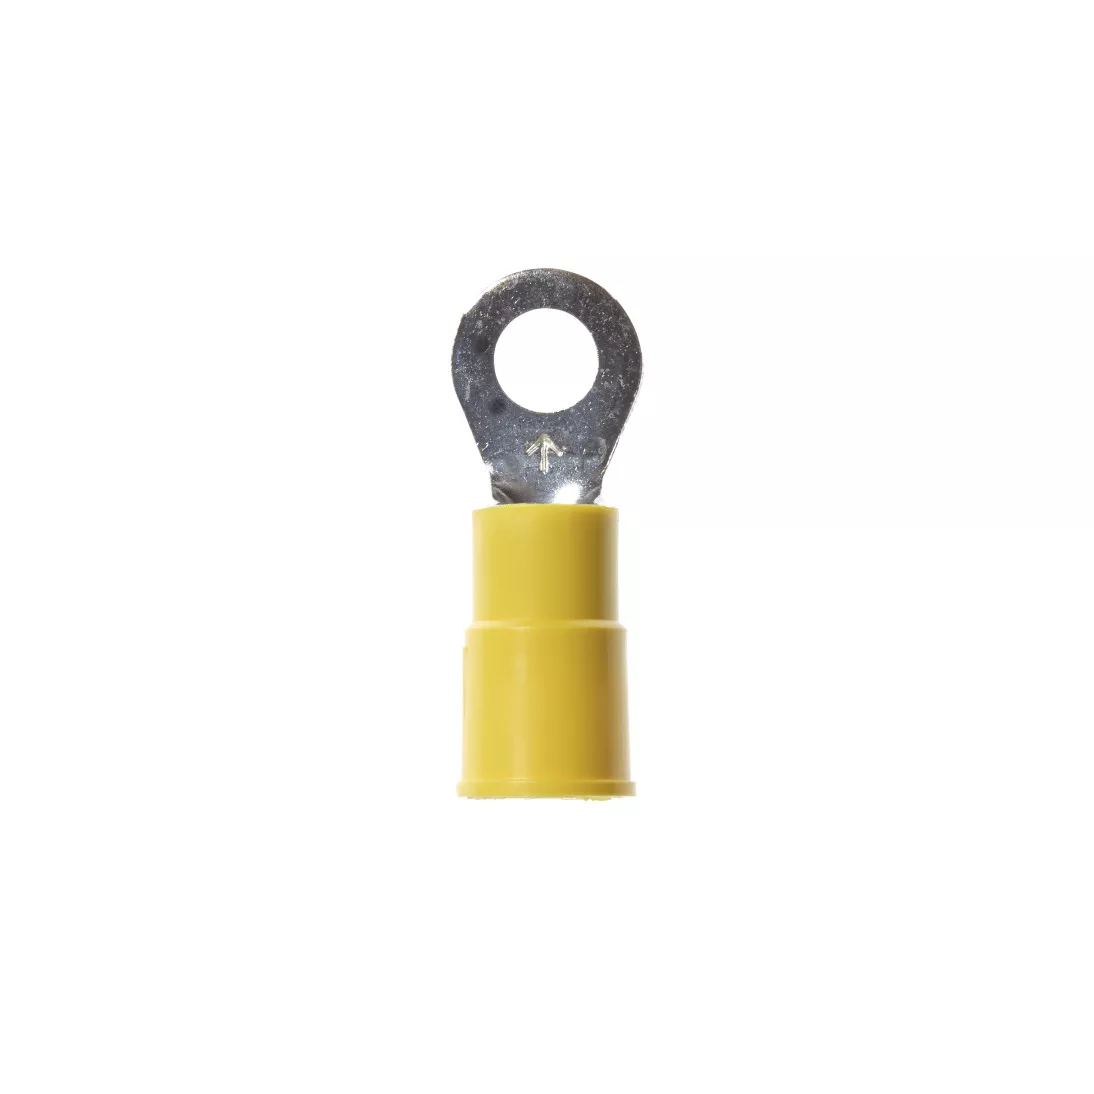 3M™ Scotchlok™ Ring Vinyl Insulated, 50/bottle, MV10-10RX,
standard-style ring tongue fits around the stud, 500/Case